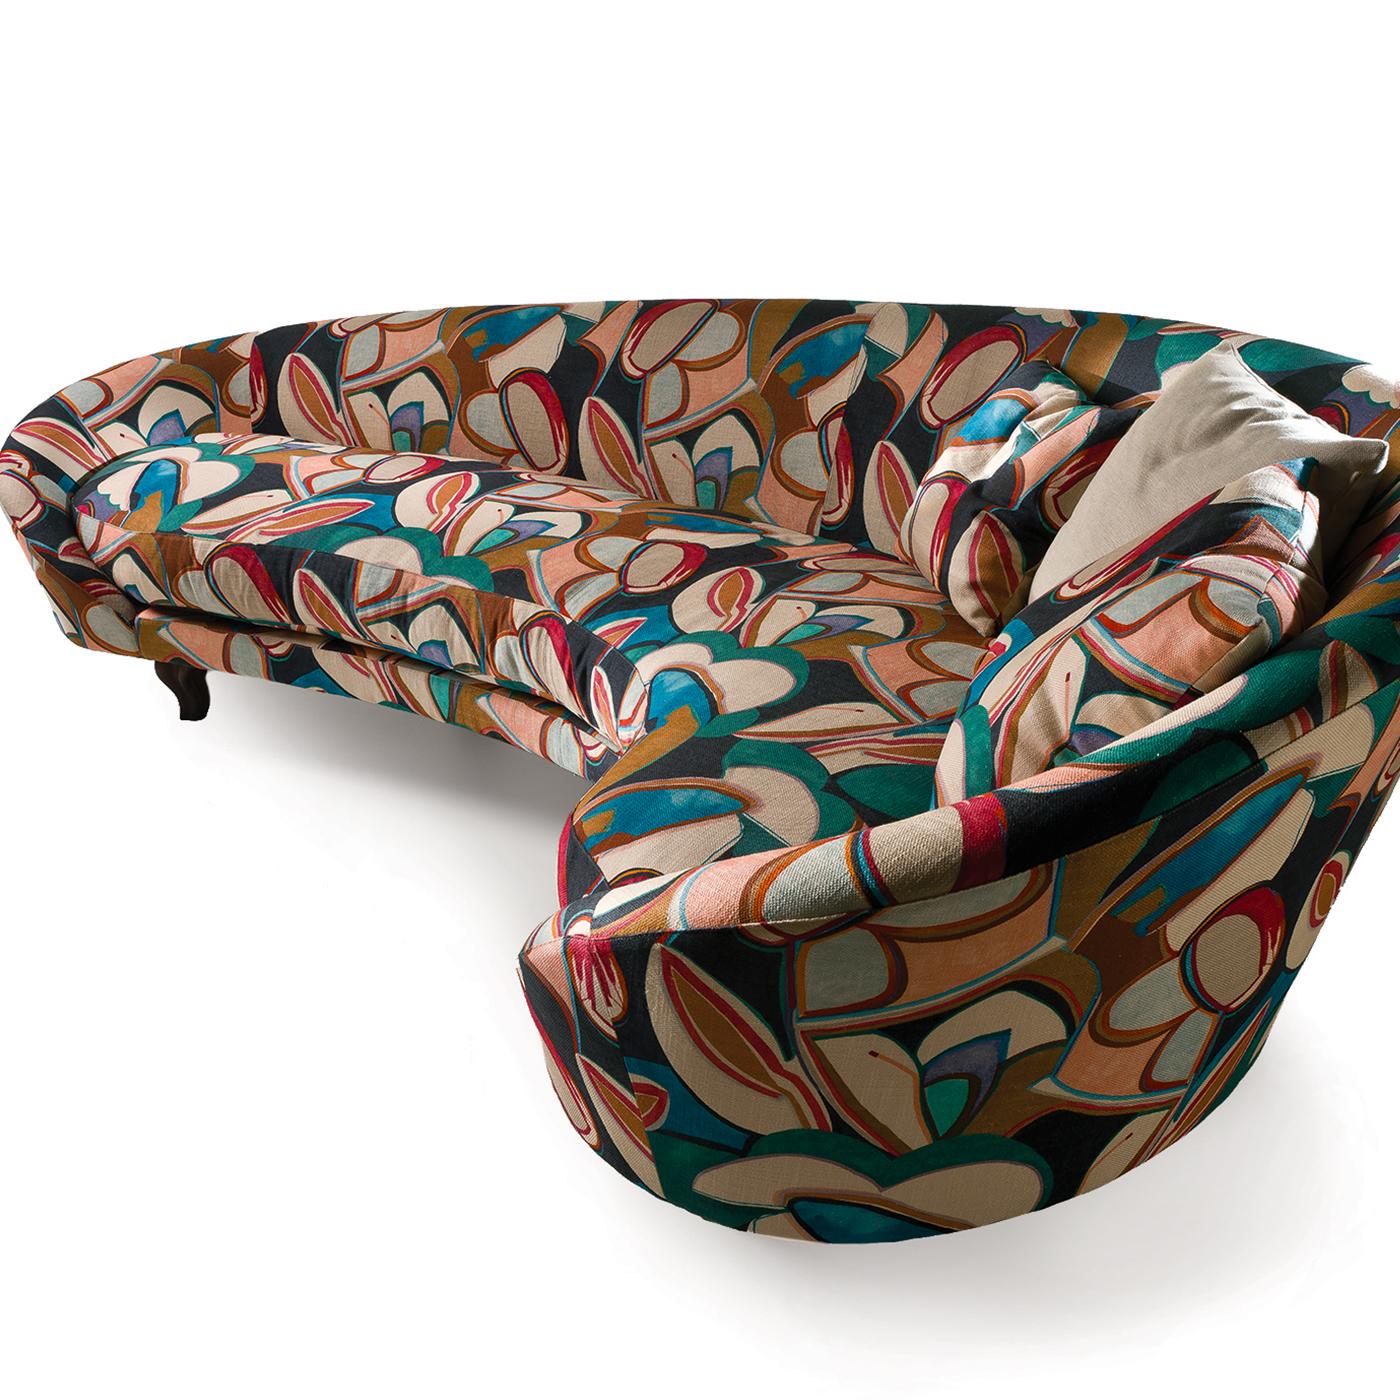 Upholstered with a printed fabric whose colorful and abstract pattern evokes the lively charm of the 1970s, this stunning sofa boasts a unique silhouette to match any decor. Its frame creates a curve along which the height of the backrest increases